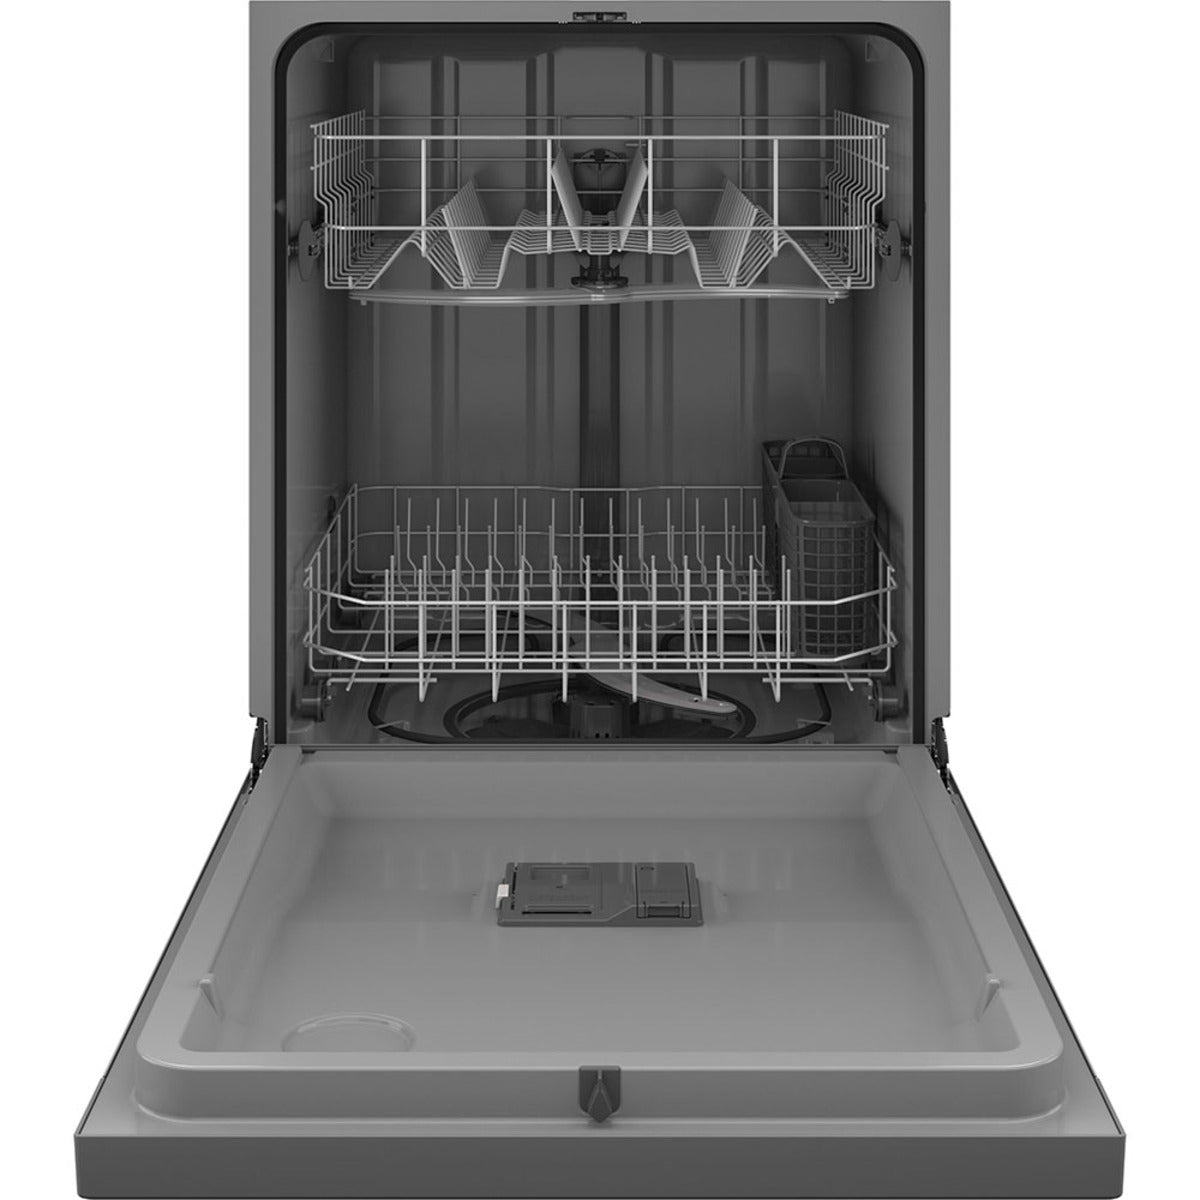 GE - 59 dBA Built In Dishwasher in Stainless - GDF510PSRSS